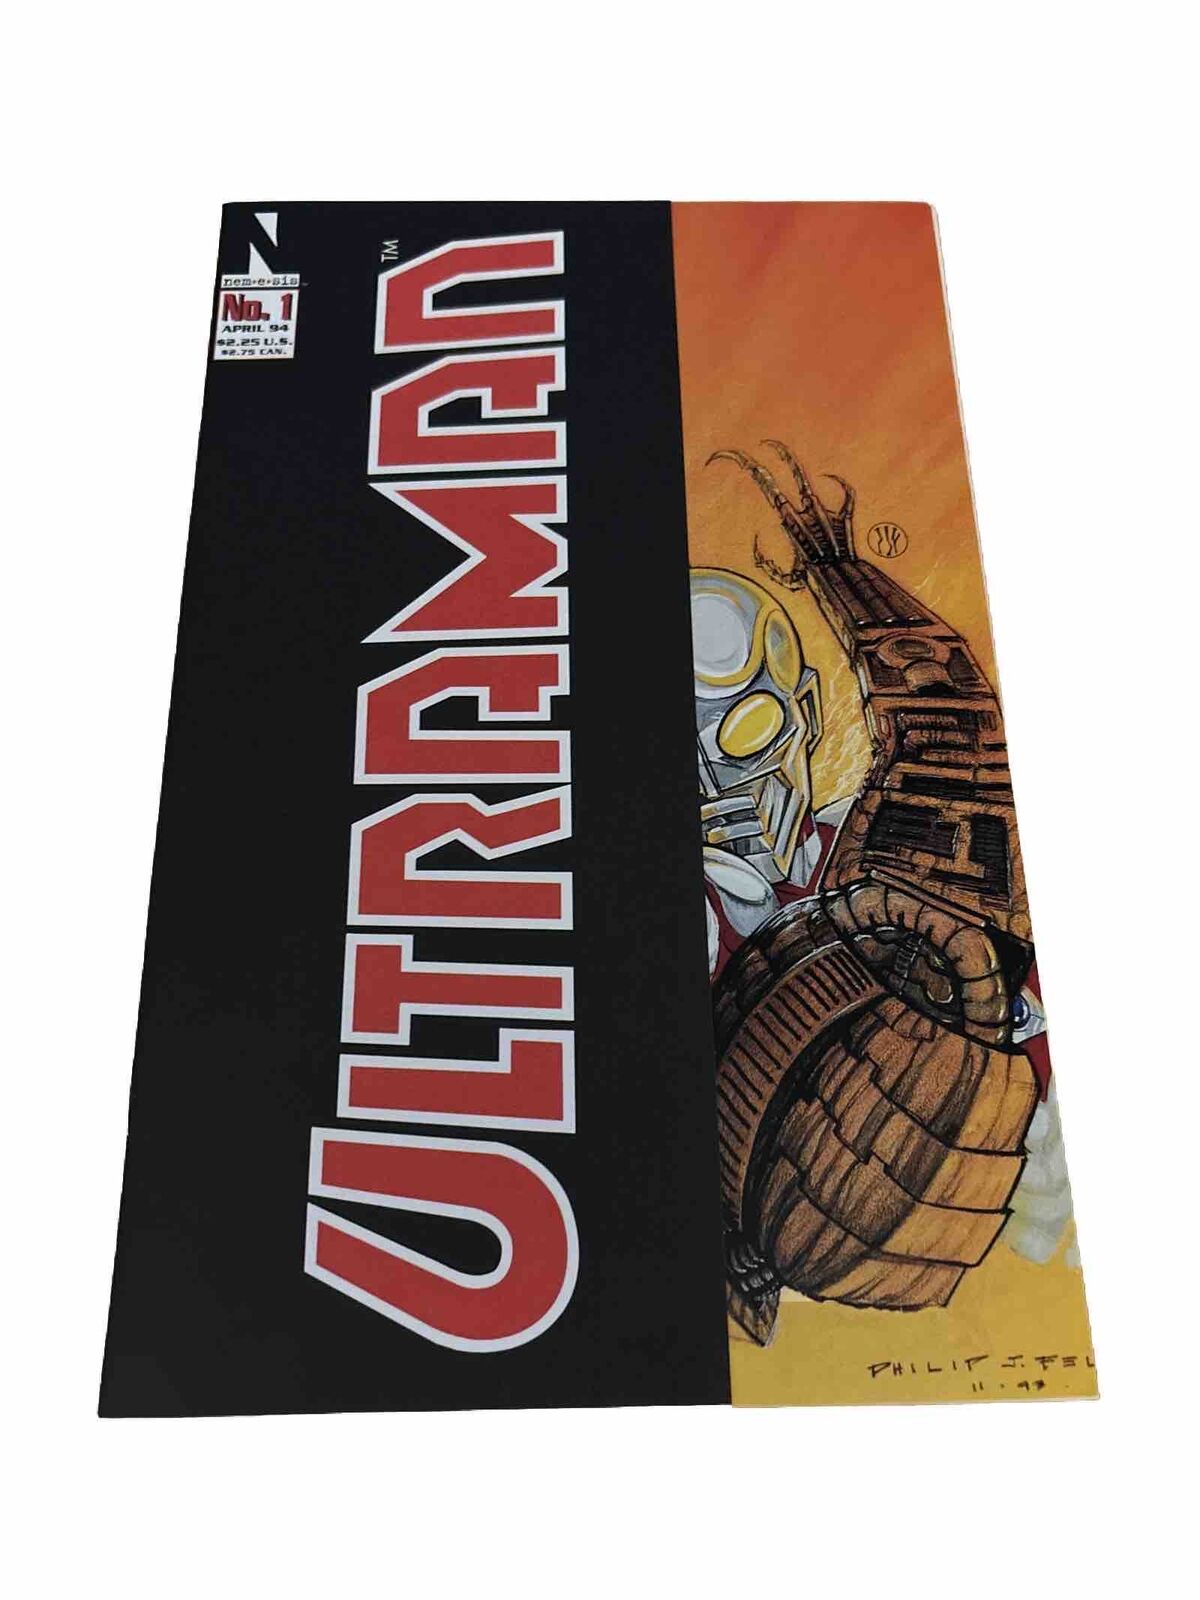 Ultraman #1 (Apr 1994) • Direct Edition Variant • ¾ Wrap-Around Cover NM (box47)